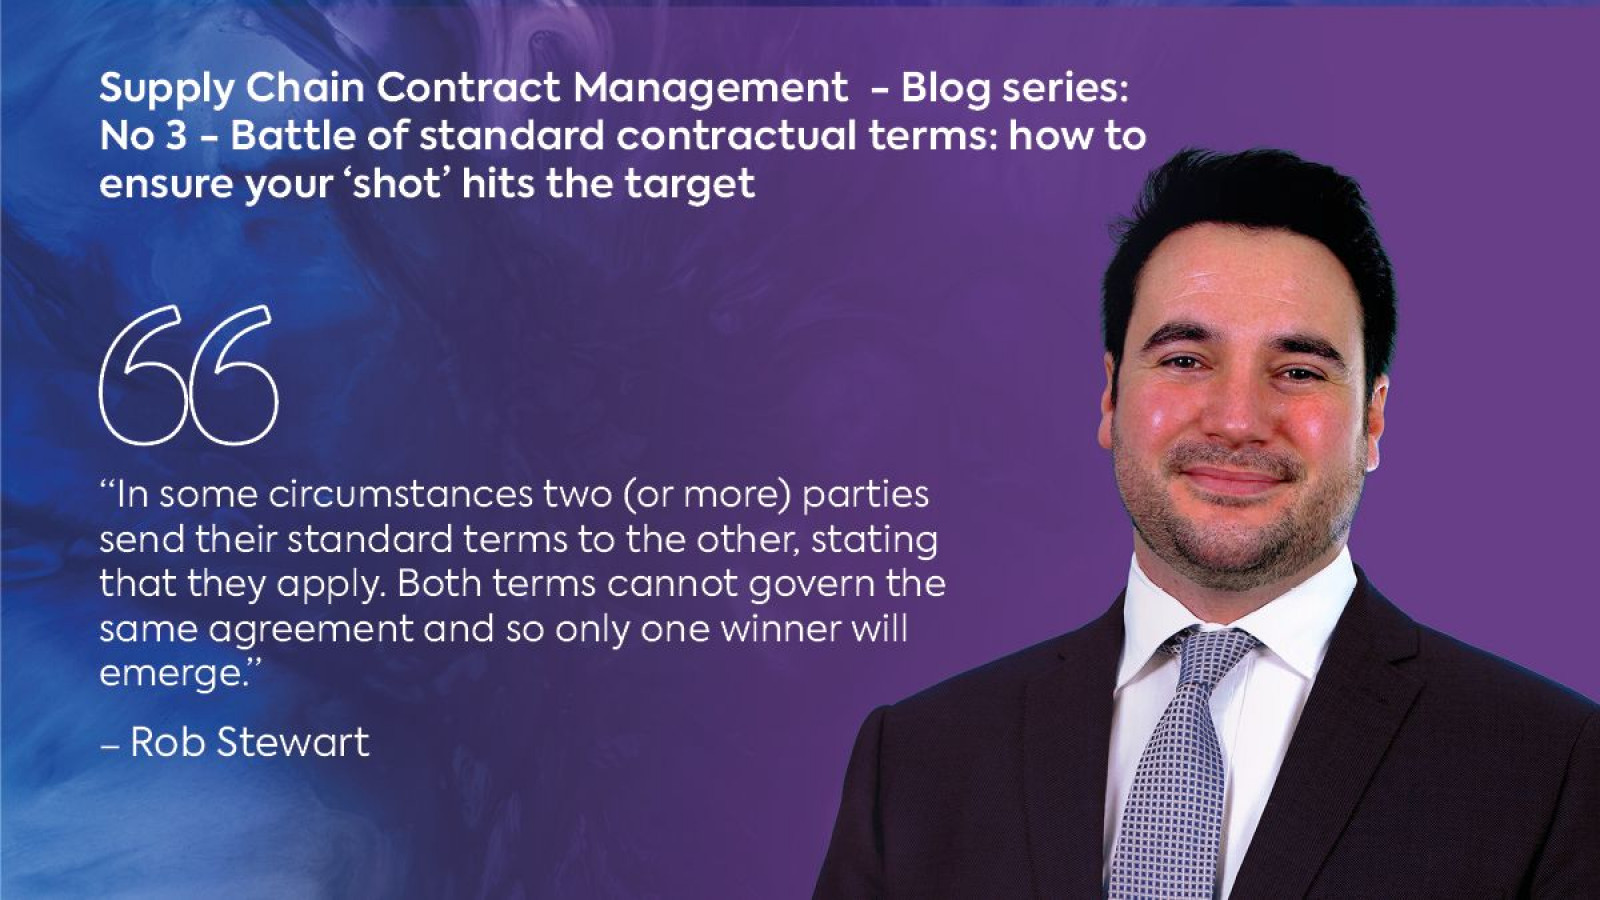 Supply chain contract management blog series #3: B...